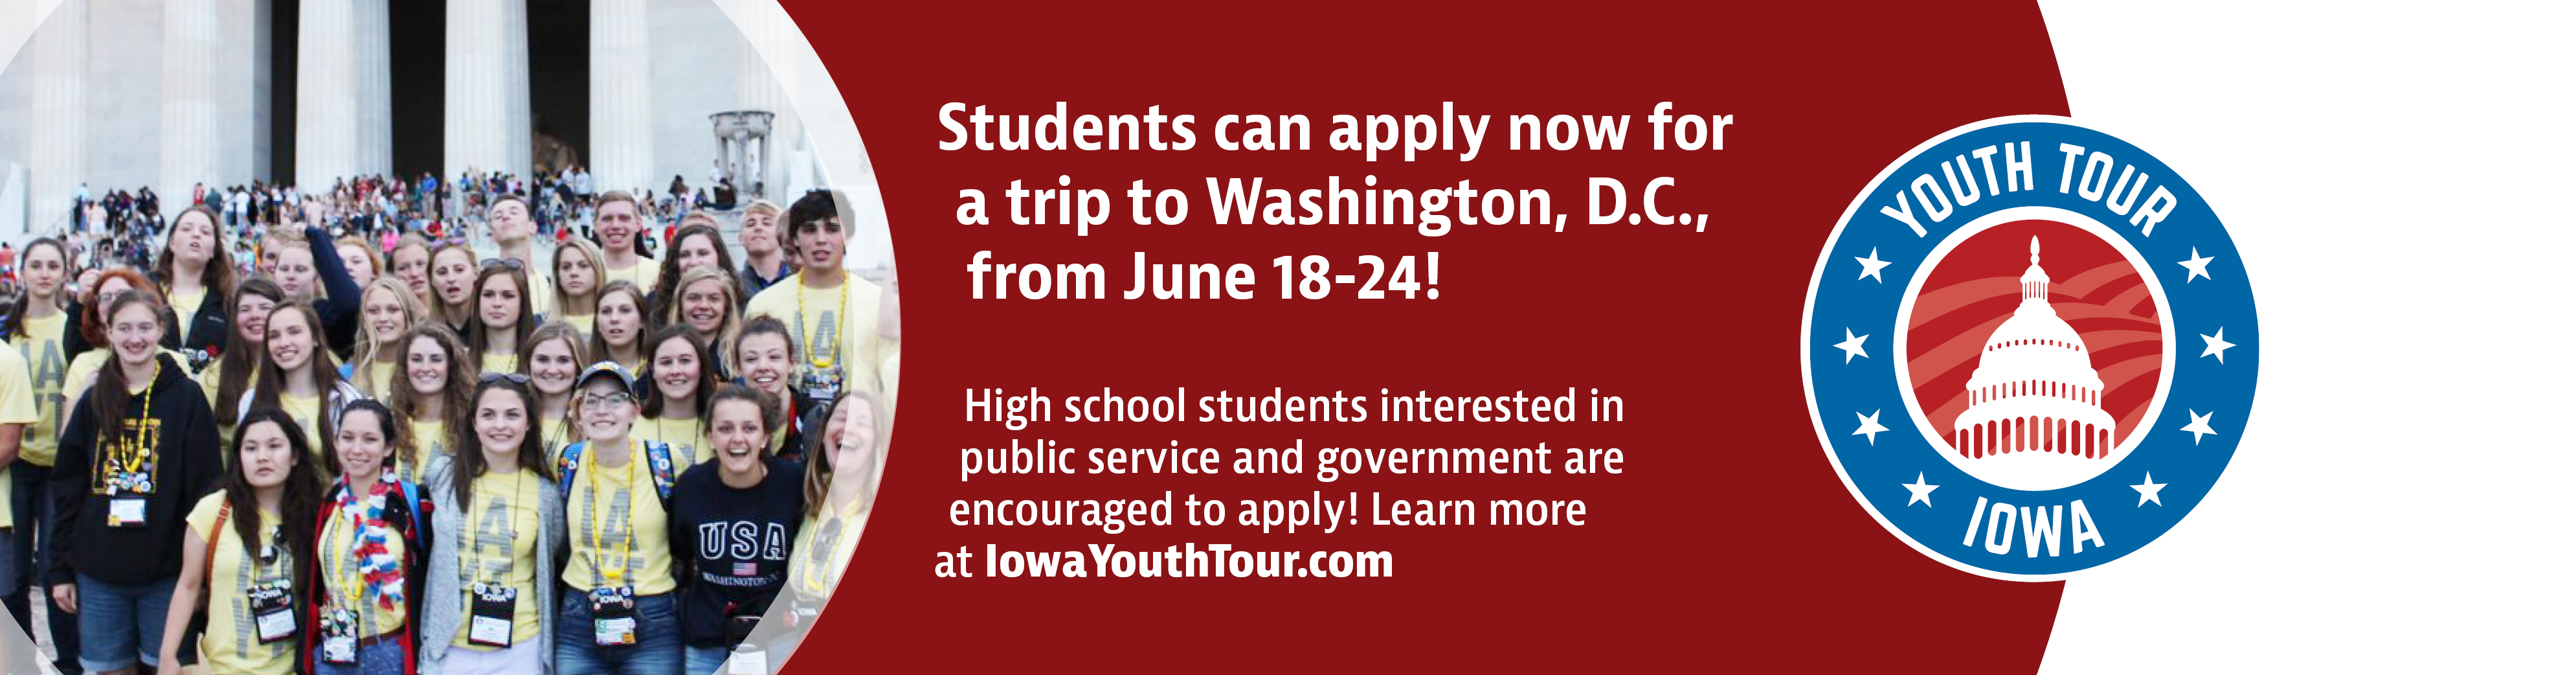 Students can apply now for a trip to Washington D.C.